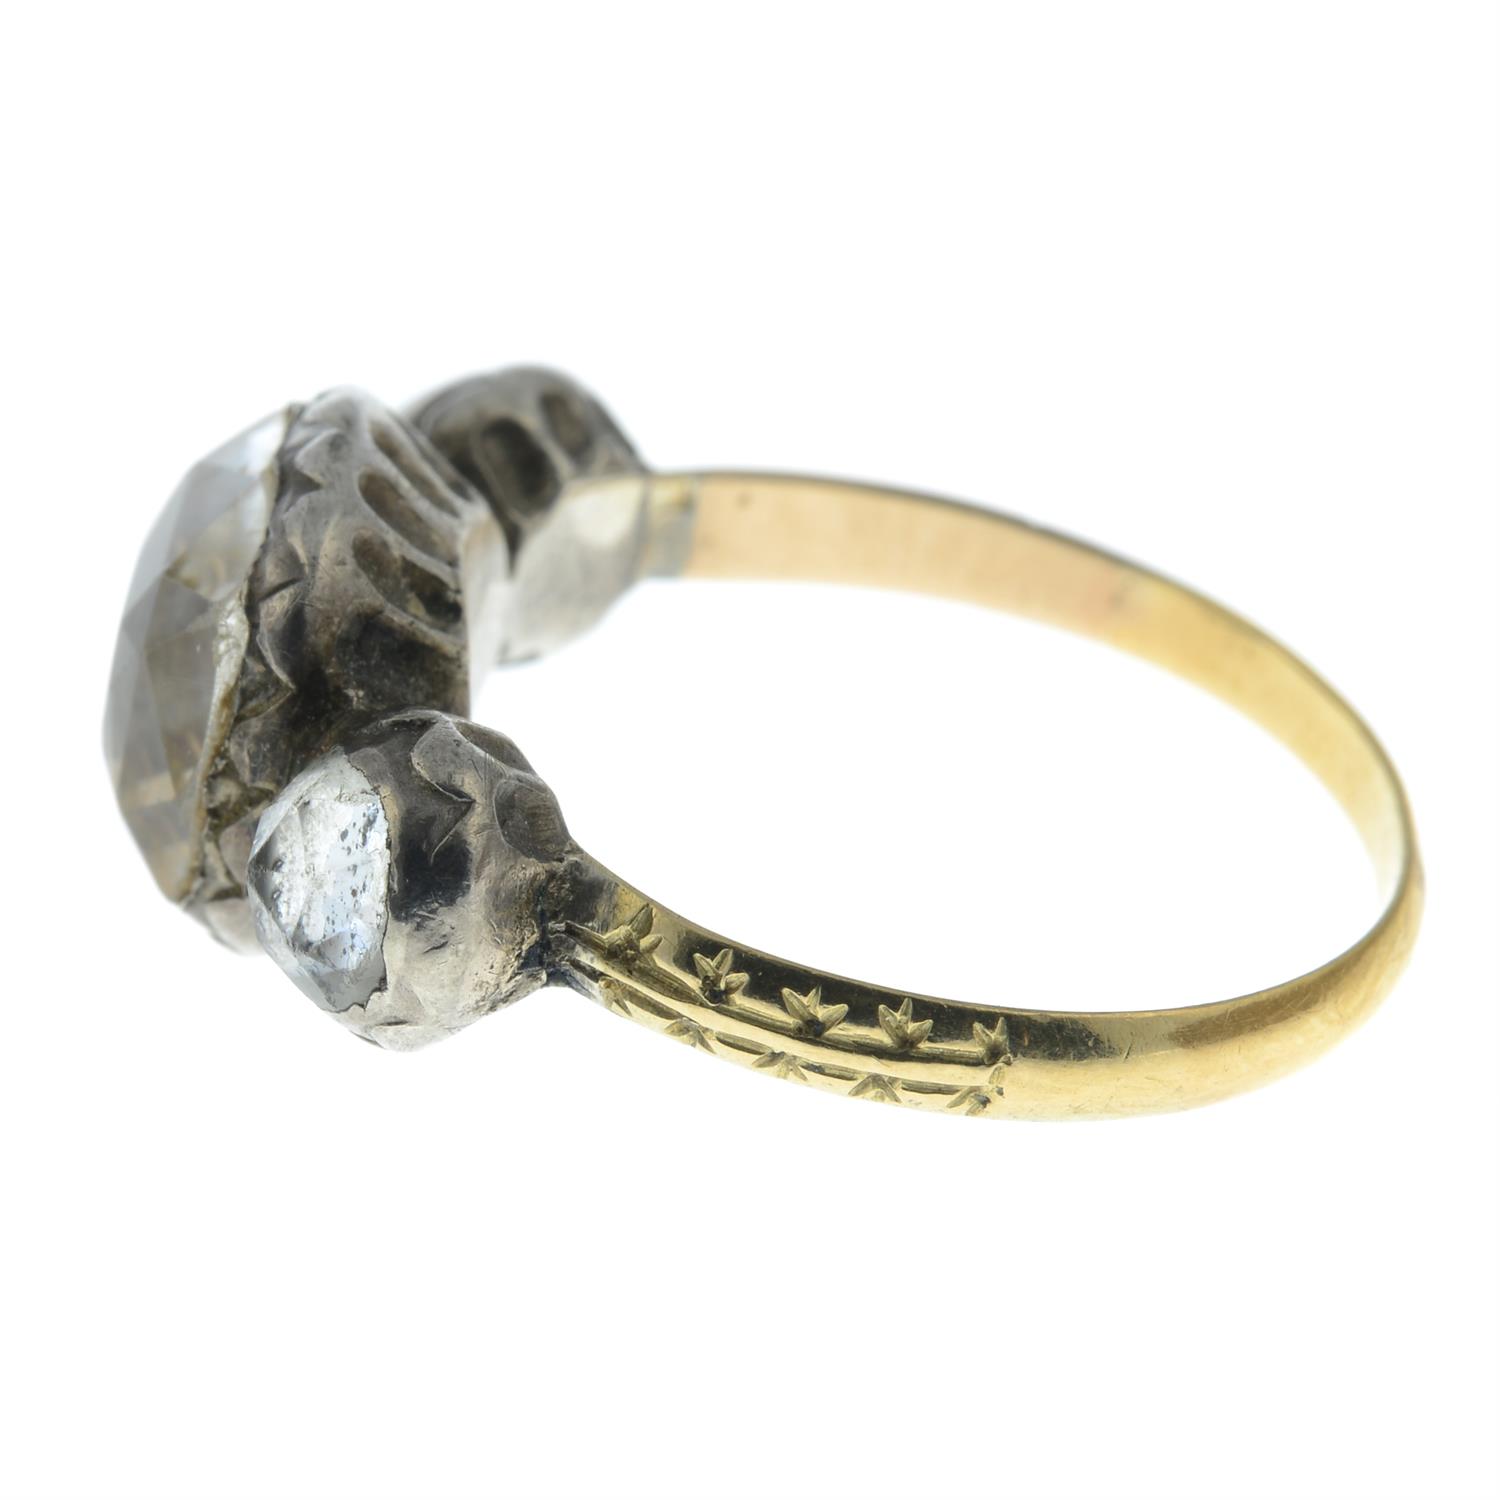 A 17th to 18th century silver and gold foil back rock crystal three-stone ring, with traces of - Image 3 of 5